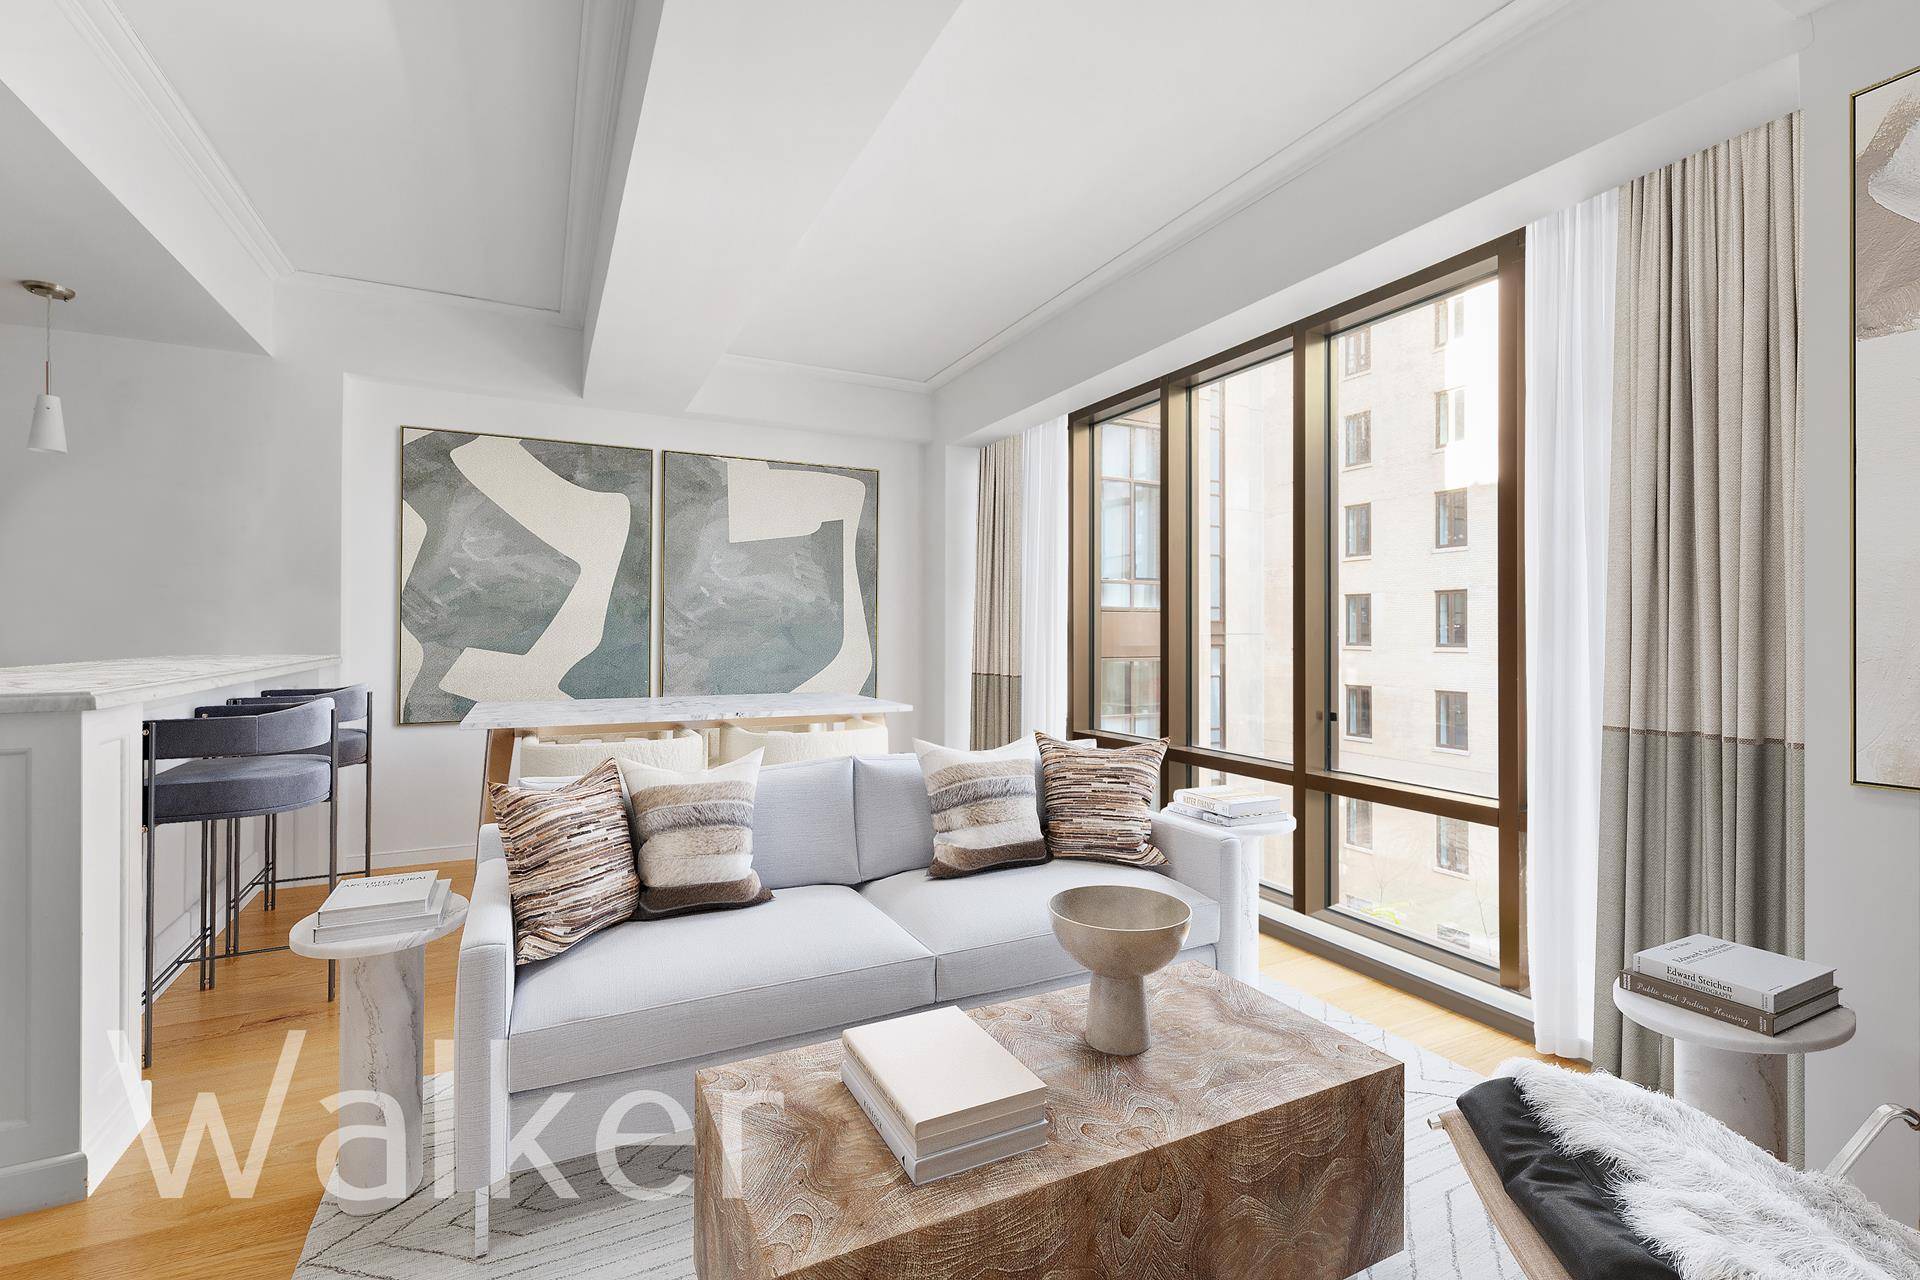 Located at 225 East 19th Street, Unit 301 at Gramercy Square is an 818 square foot one bedroom residence boasting an abundance of natural light throughout the day with charming ...